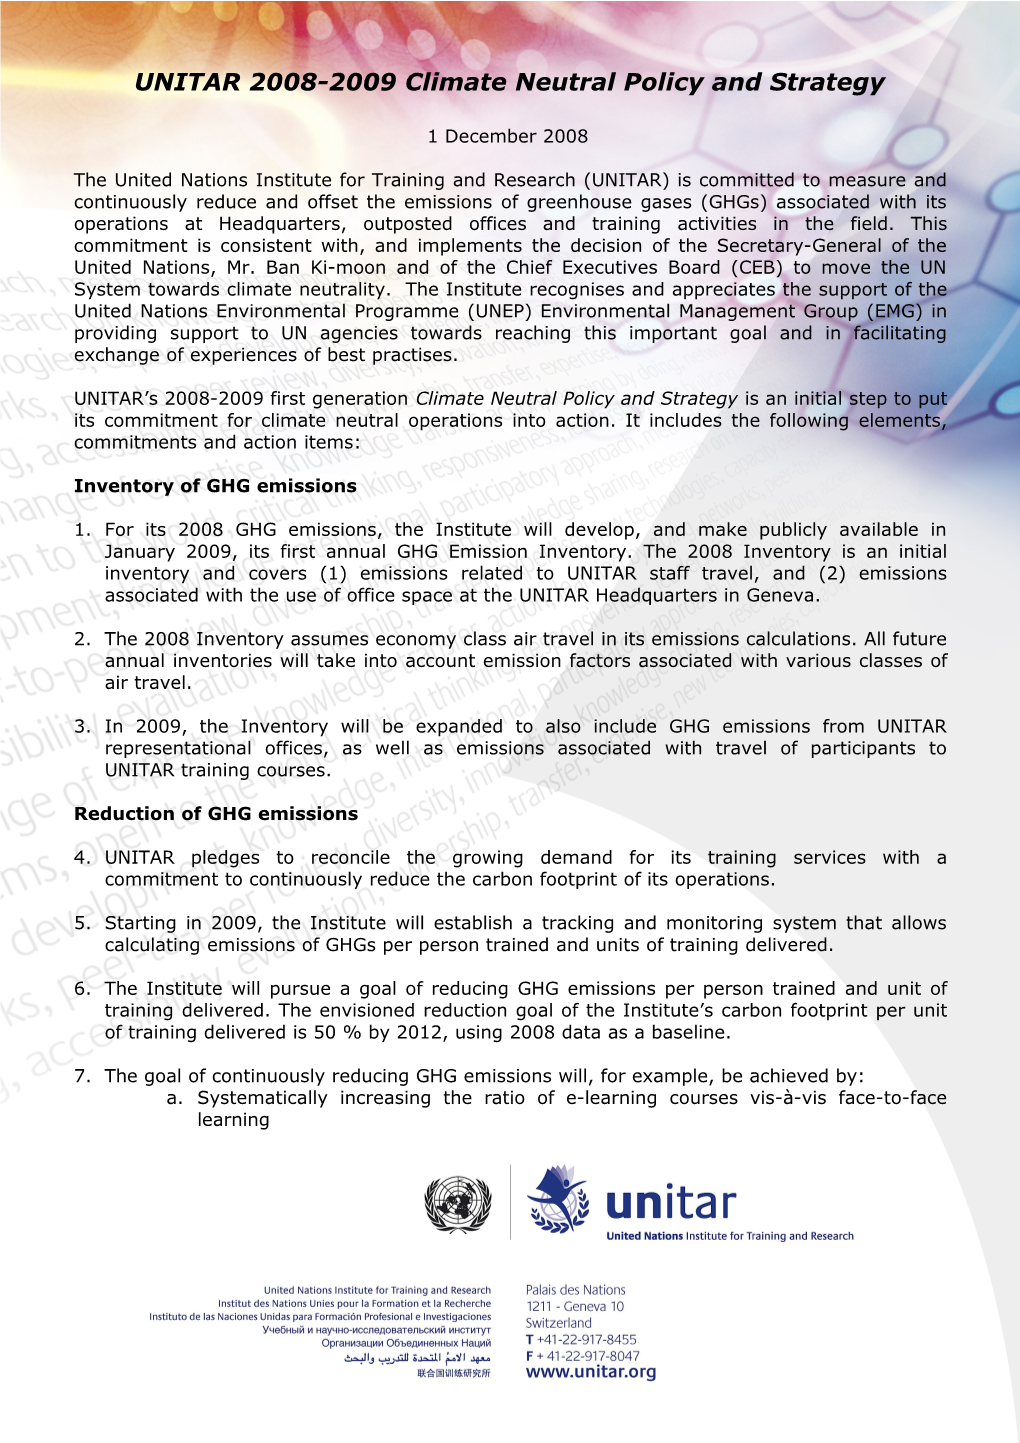 UNITAR 2008-2009 Climate Neutral Policy and Strategy